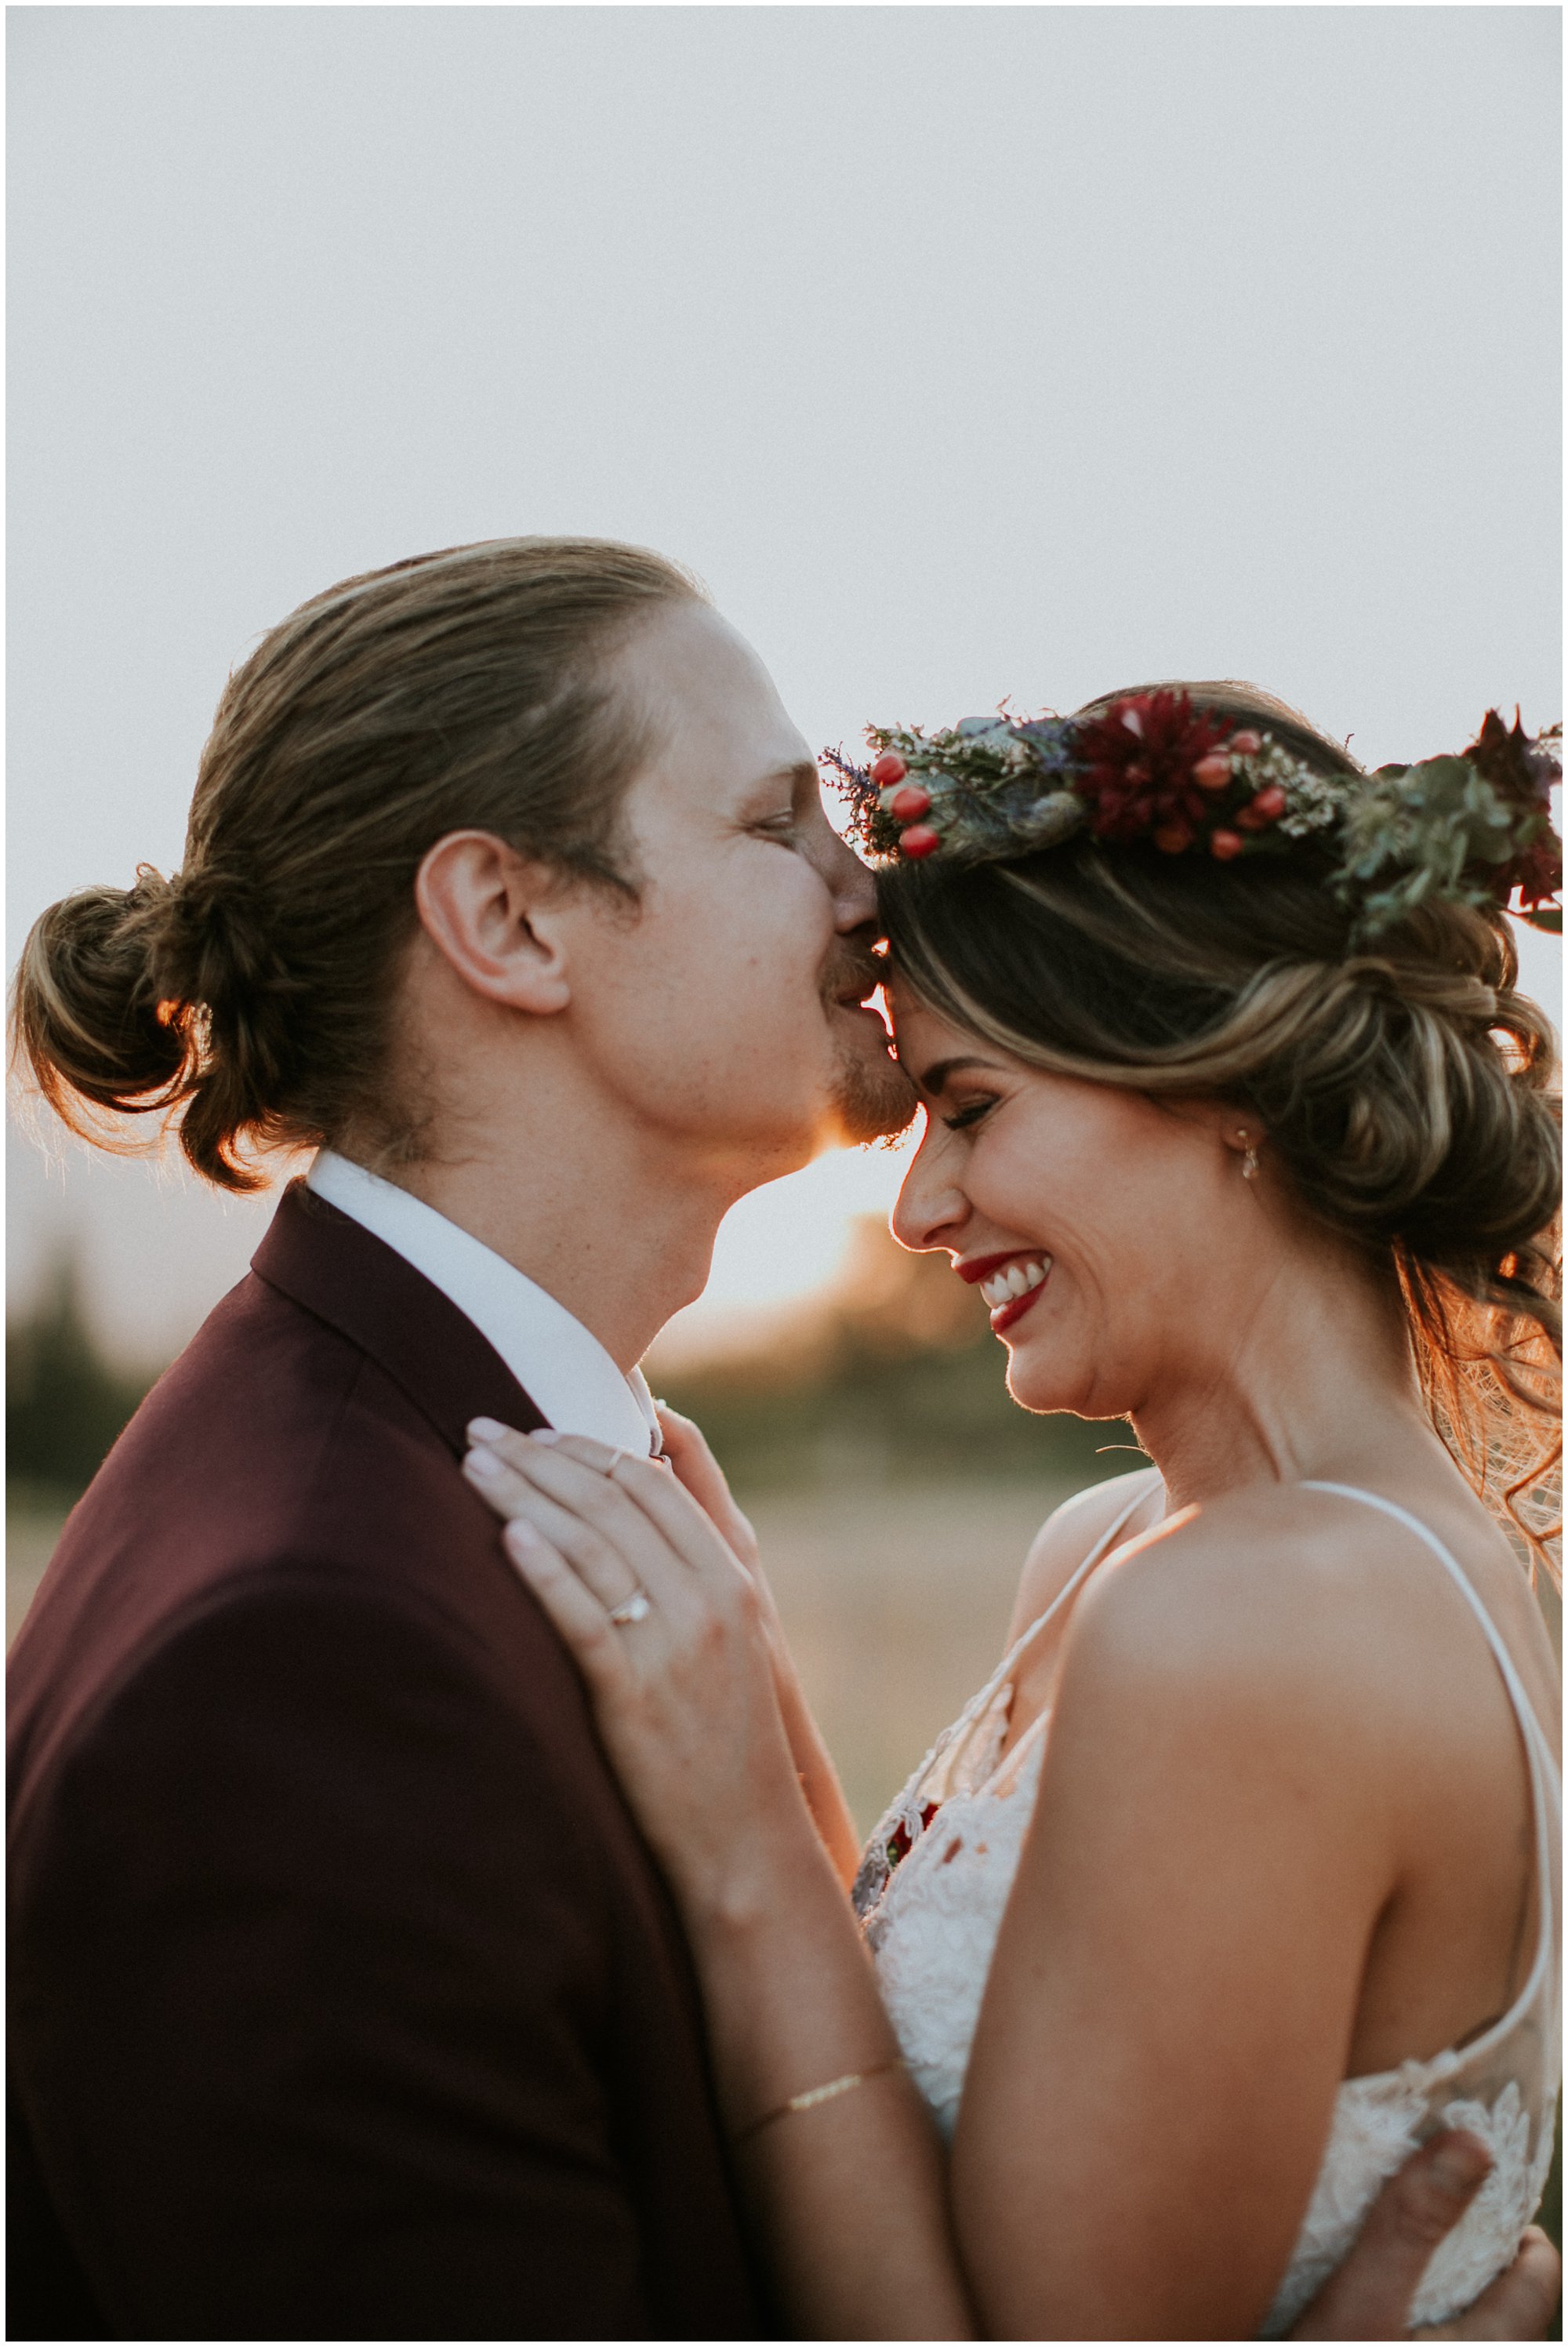 Romantic Sunset Couple Shoot at an Outdoor Bohemian Destination Wedding at Francine’s Venue in Hoedspruit Limpopo by Junebug World's Best Photographer Maryke Albertyn Award Winning International Alternative Moody Photography based in Cape Town South Africa